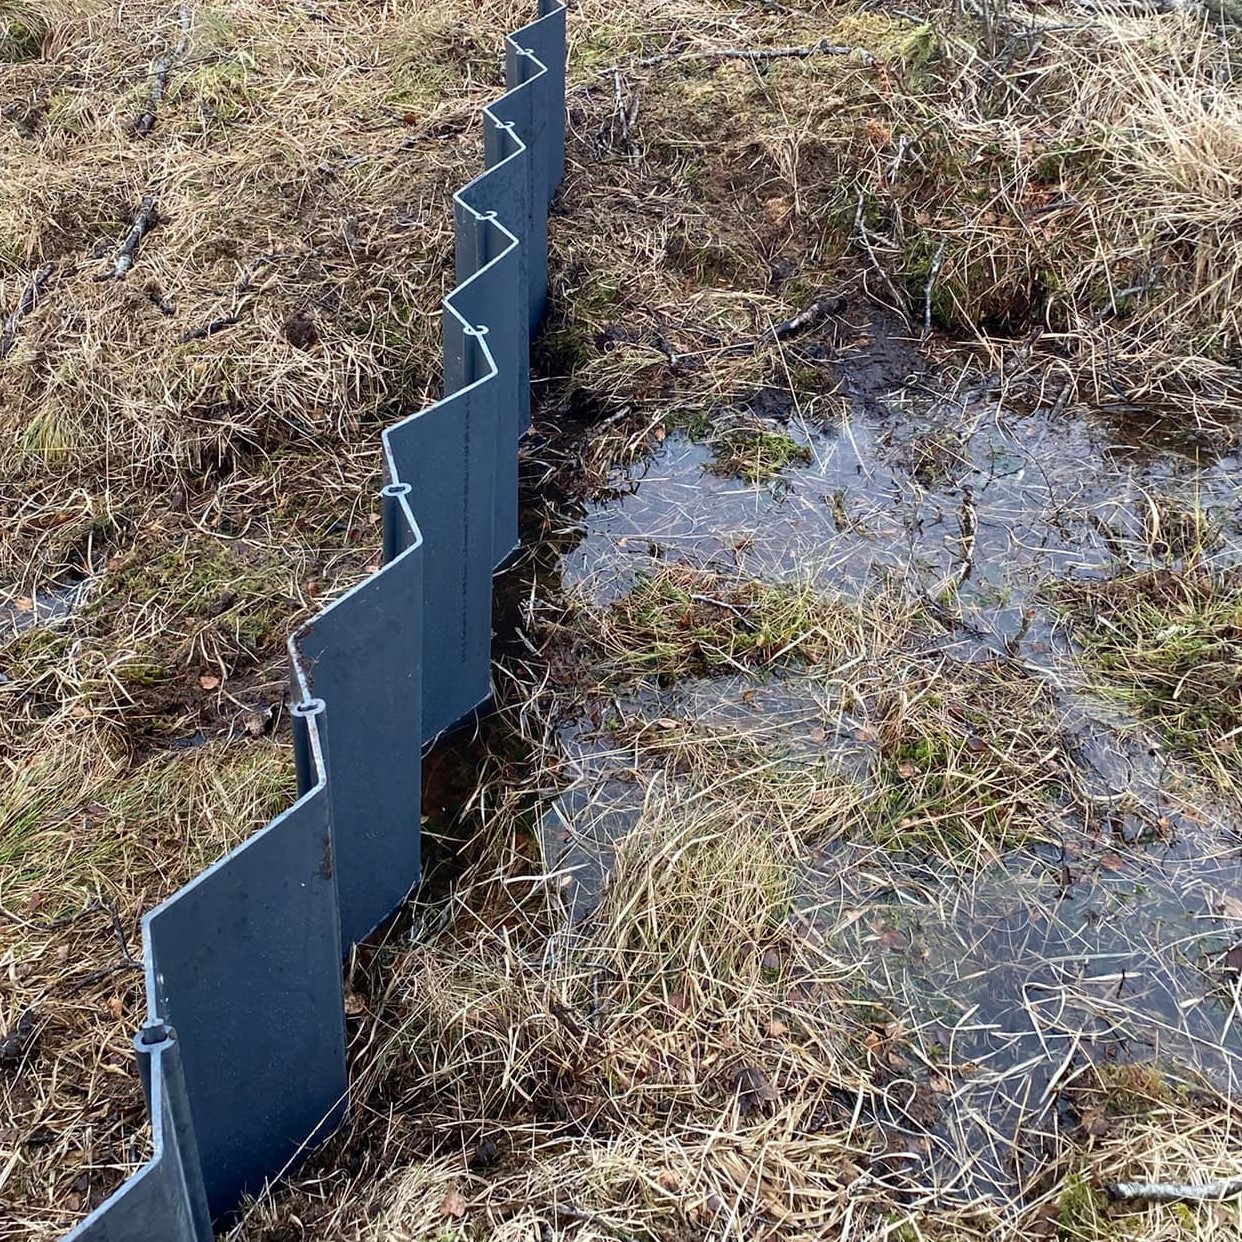 Plastic piling to help block ditches on the moss